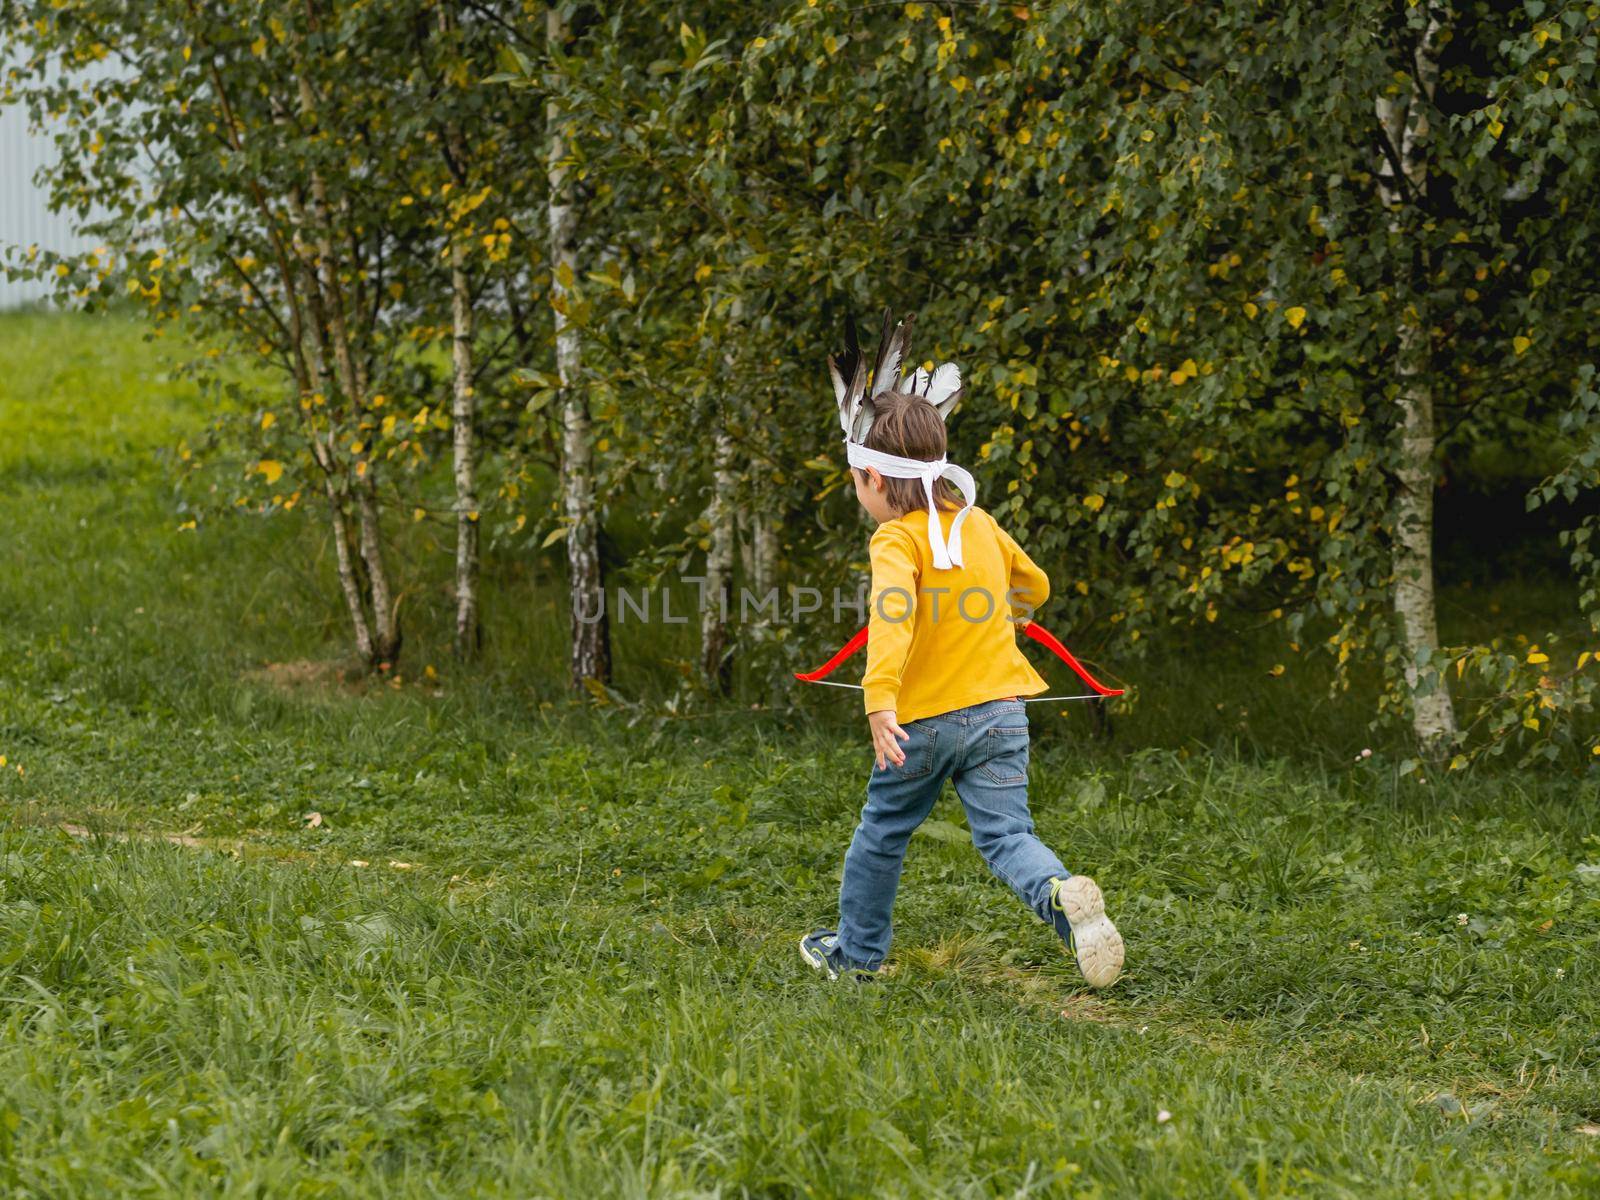 Little boy is playing American Indian on field. Kid has handmade headdress made of feathers and bow with arrows. Costume role play. Outdoor leisure activity. Fall season.